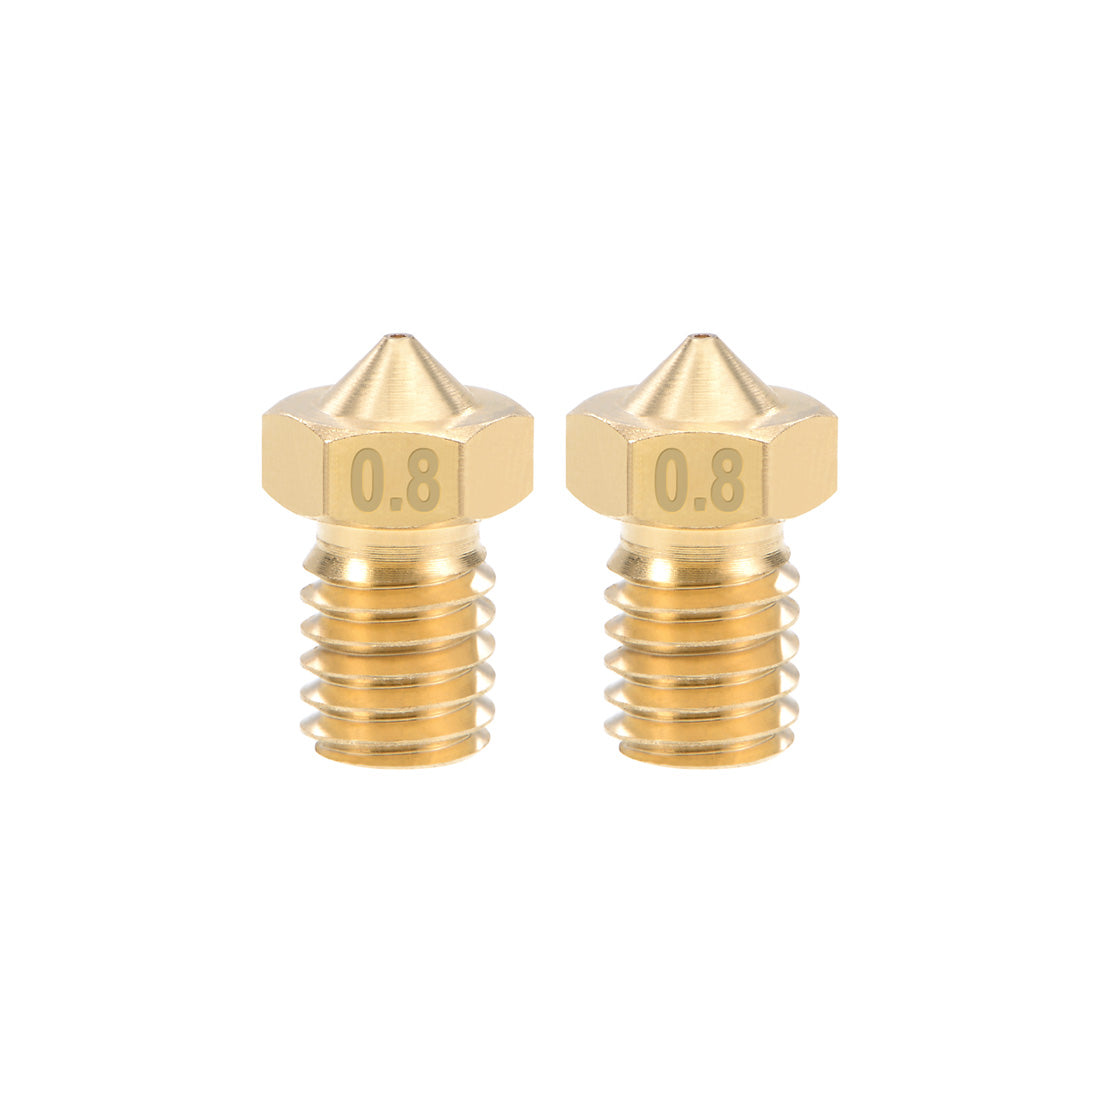 uxcell Uxcell 0.8mm 3D Printer Nozzle Head M6 for V5 V6 1.75mm Extruder Print, Brass 2pcs